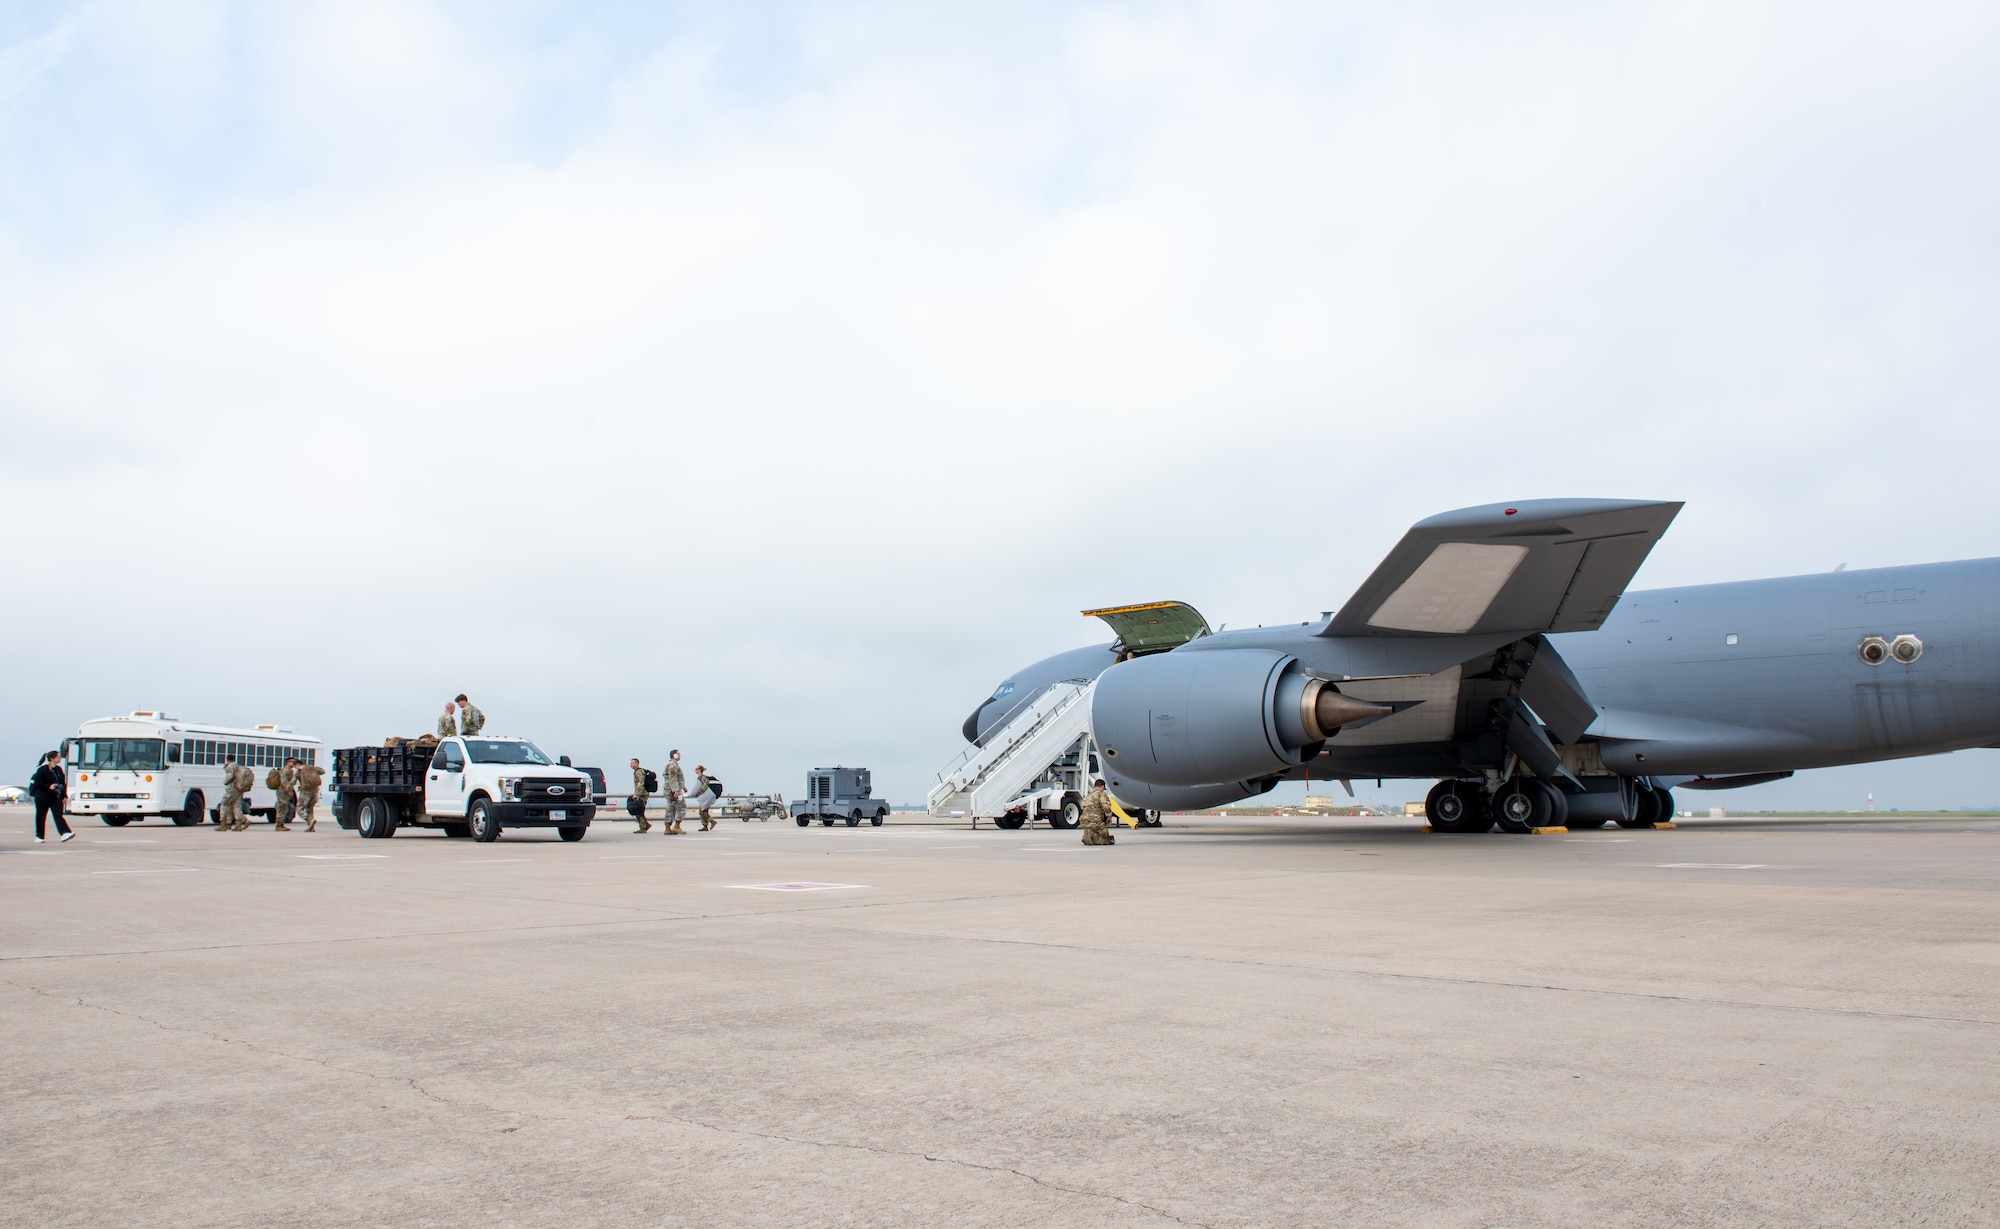 U.S Air Force Airmen provide initial ground support as U.S. Air Force Reserve Airmen arrive at Morón Air Base